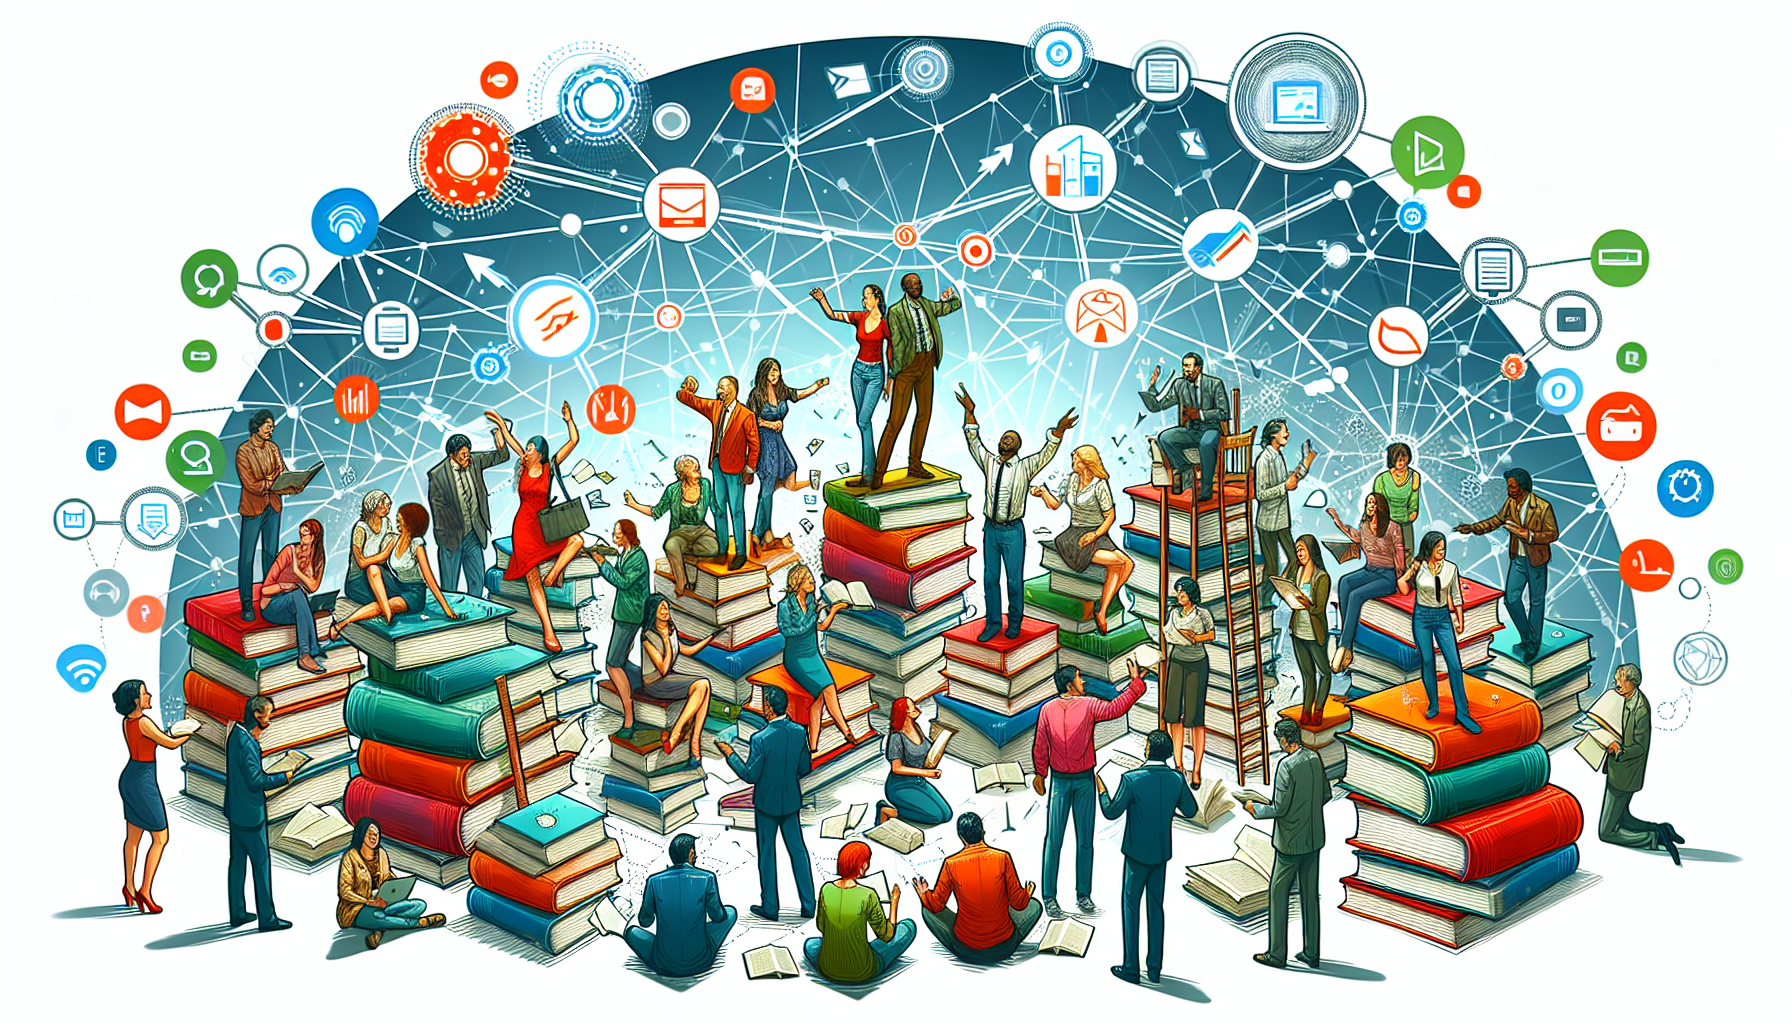 Illustration of authors collaborating and promoting books